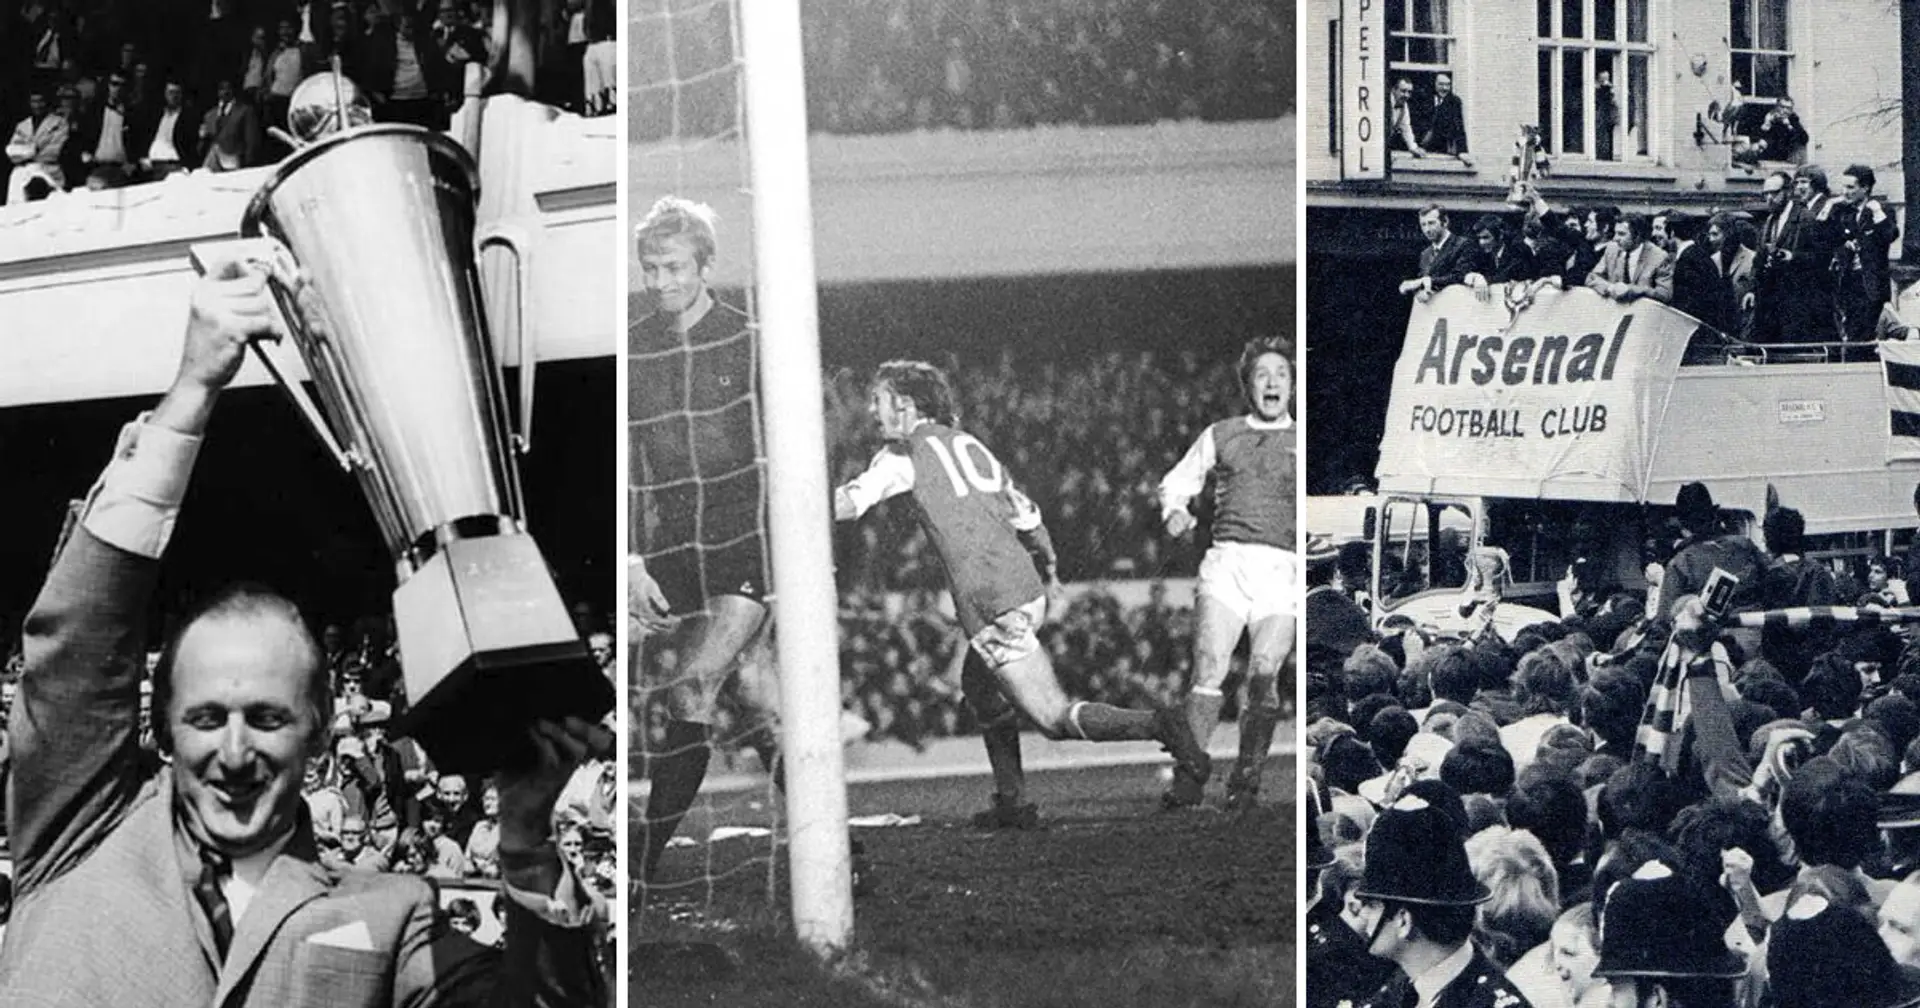 'The greatest game at Highbury': On this day 50 years ago, Arsenal lifted their first European trophy